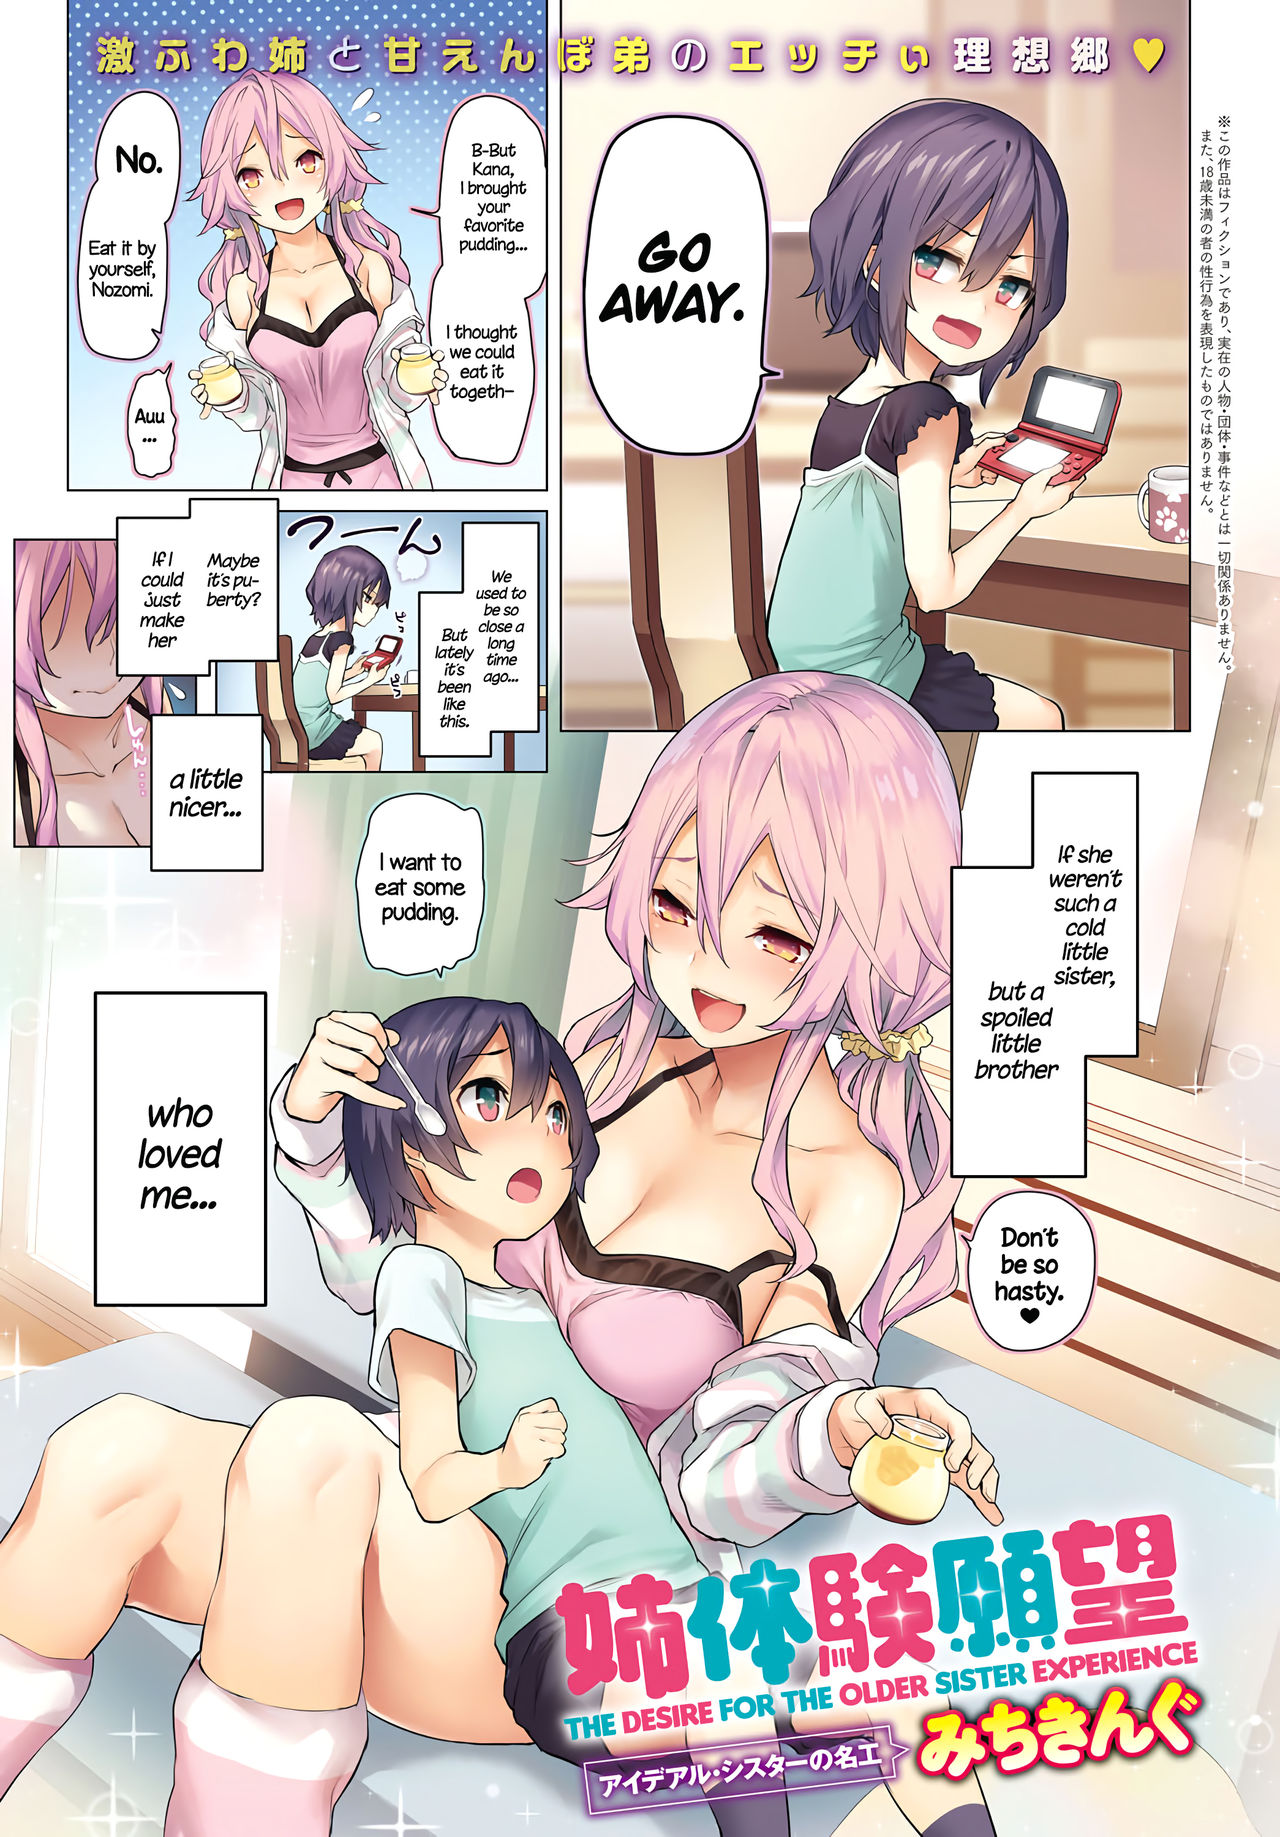 The Desire For The Older Sister Experience - Porn Cartoon Comics